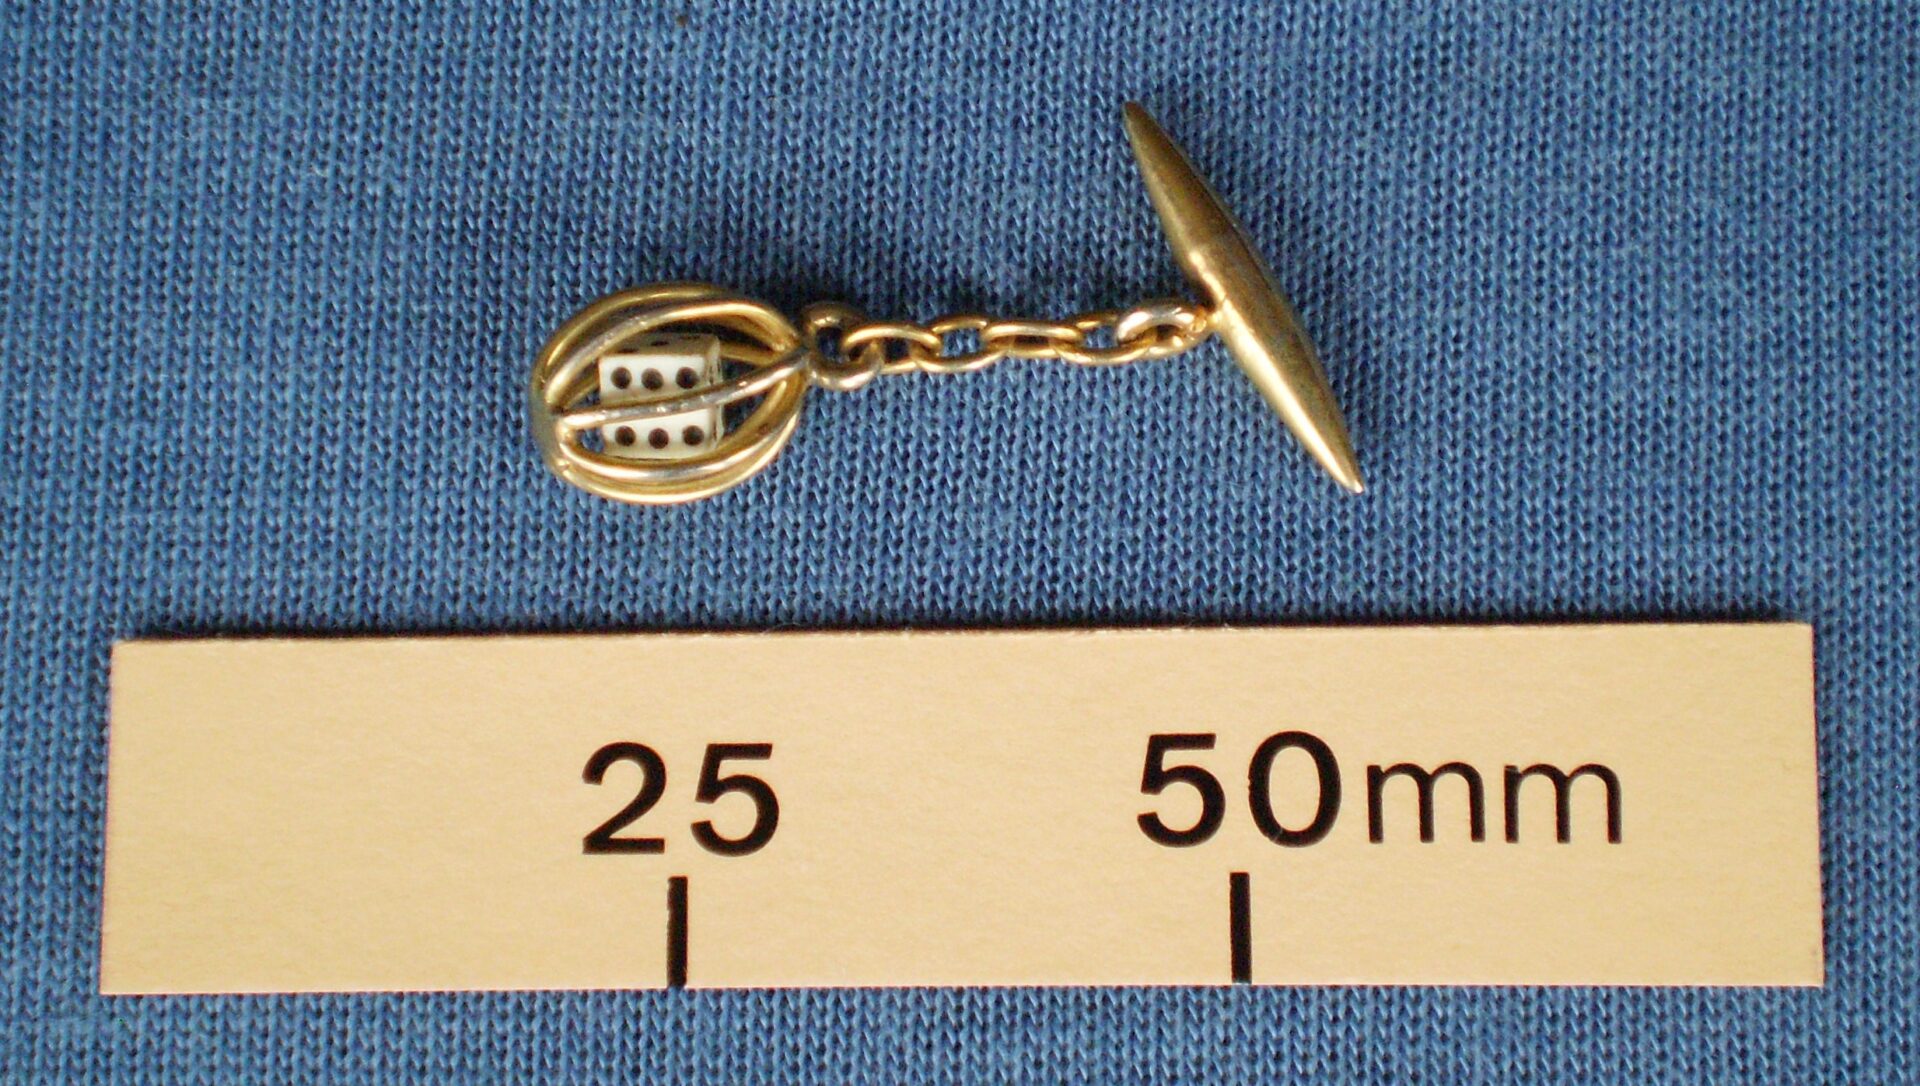 Single cufflink with a die in a cage